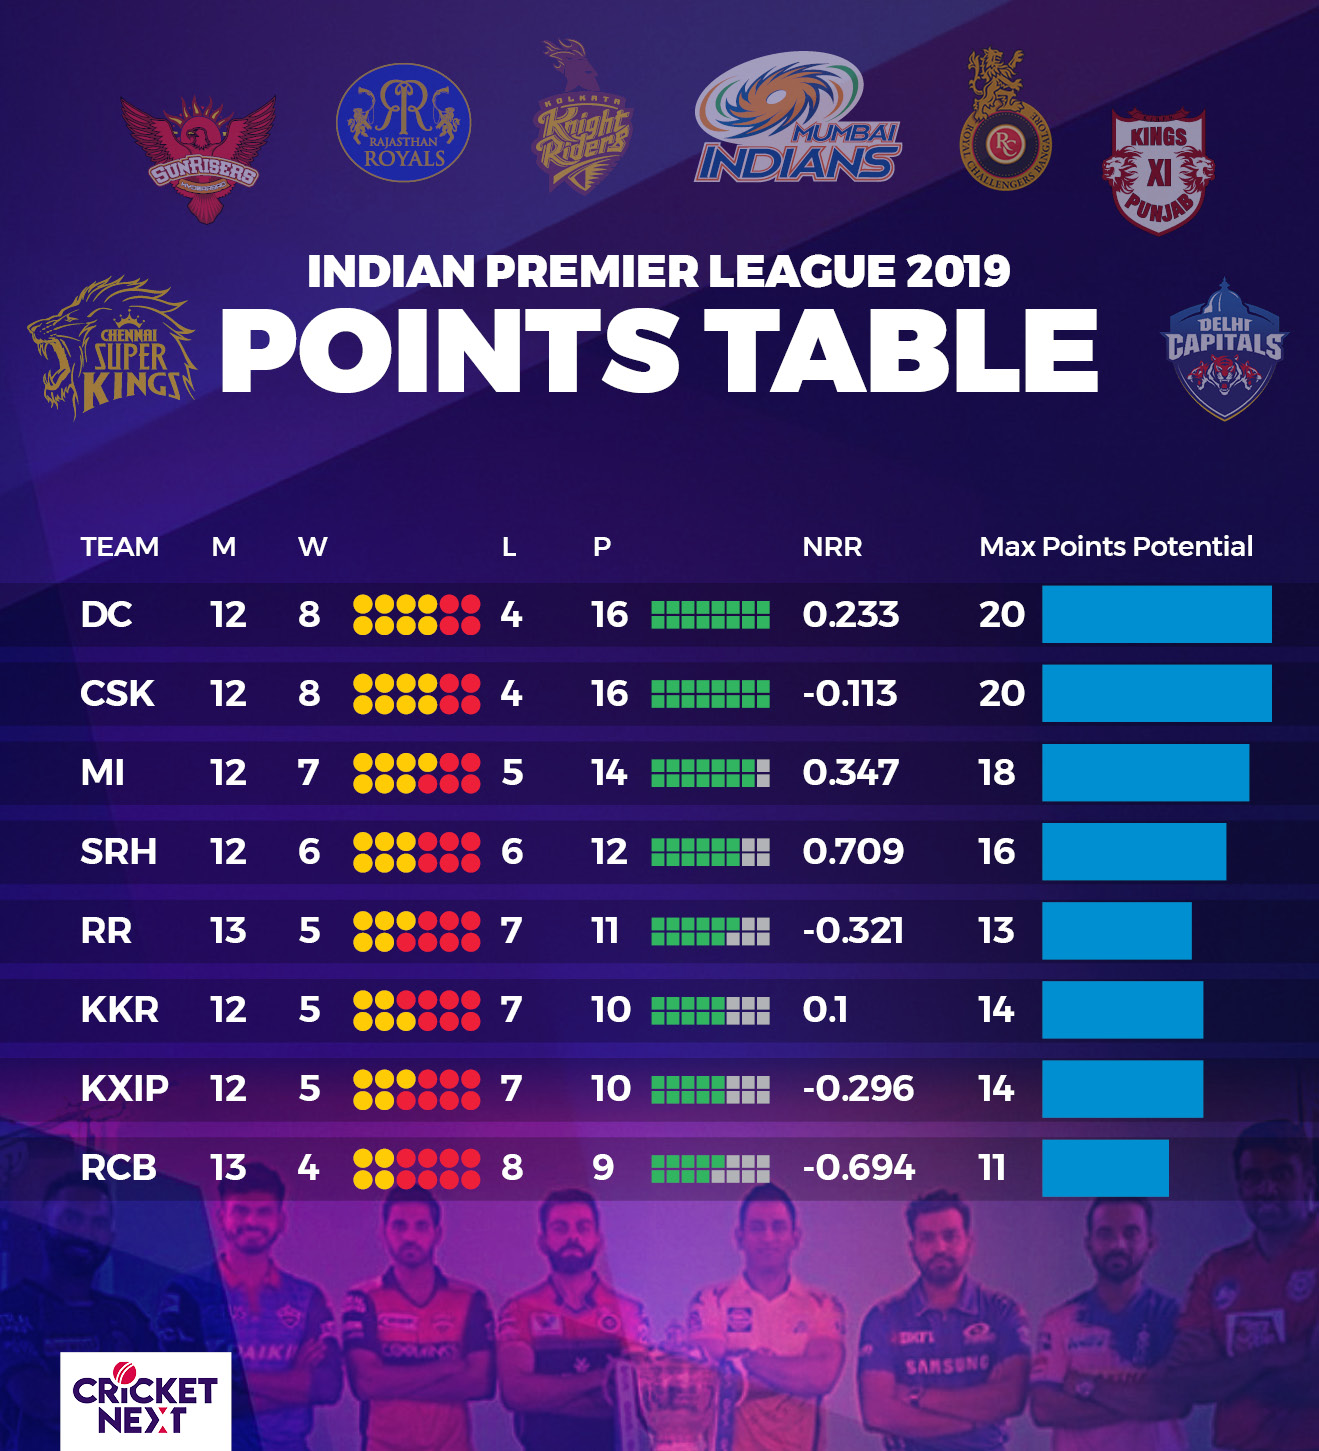 IPL 2019 Qualification Scenarios Who Can Make it and How News18